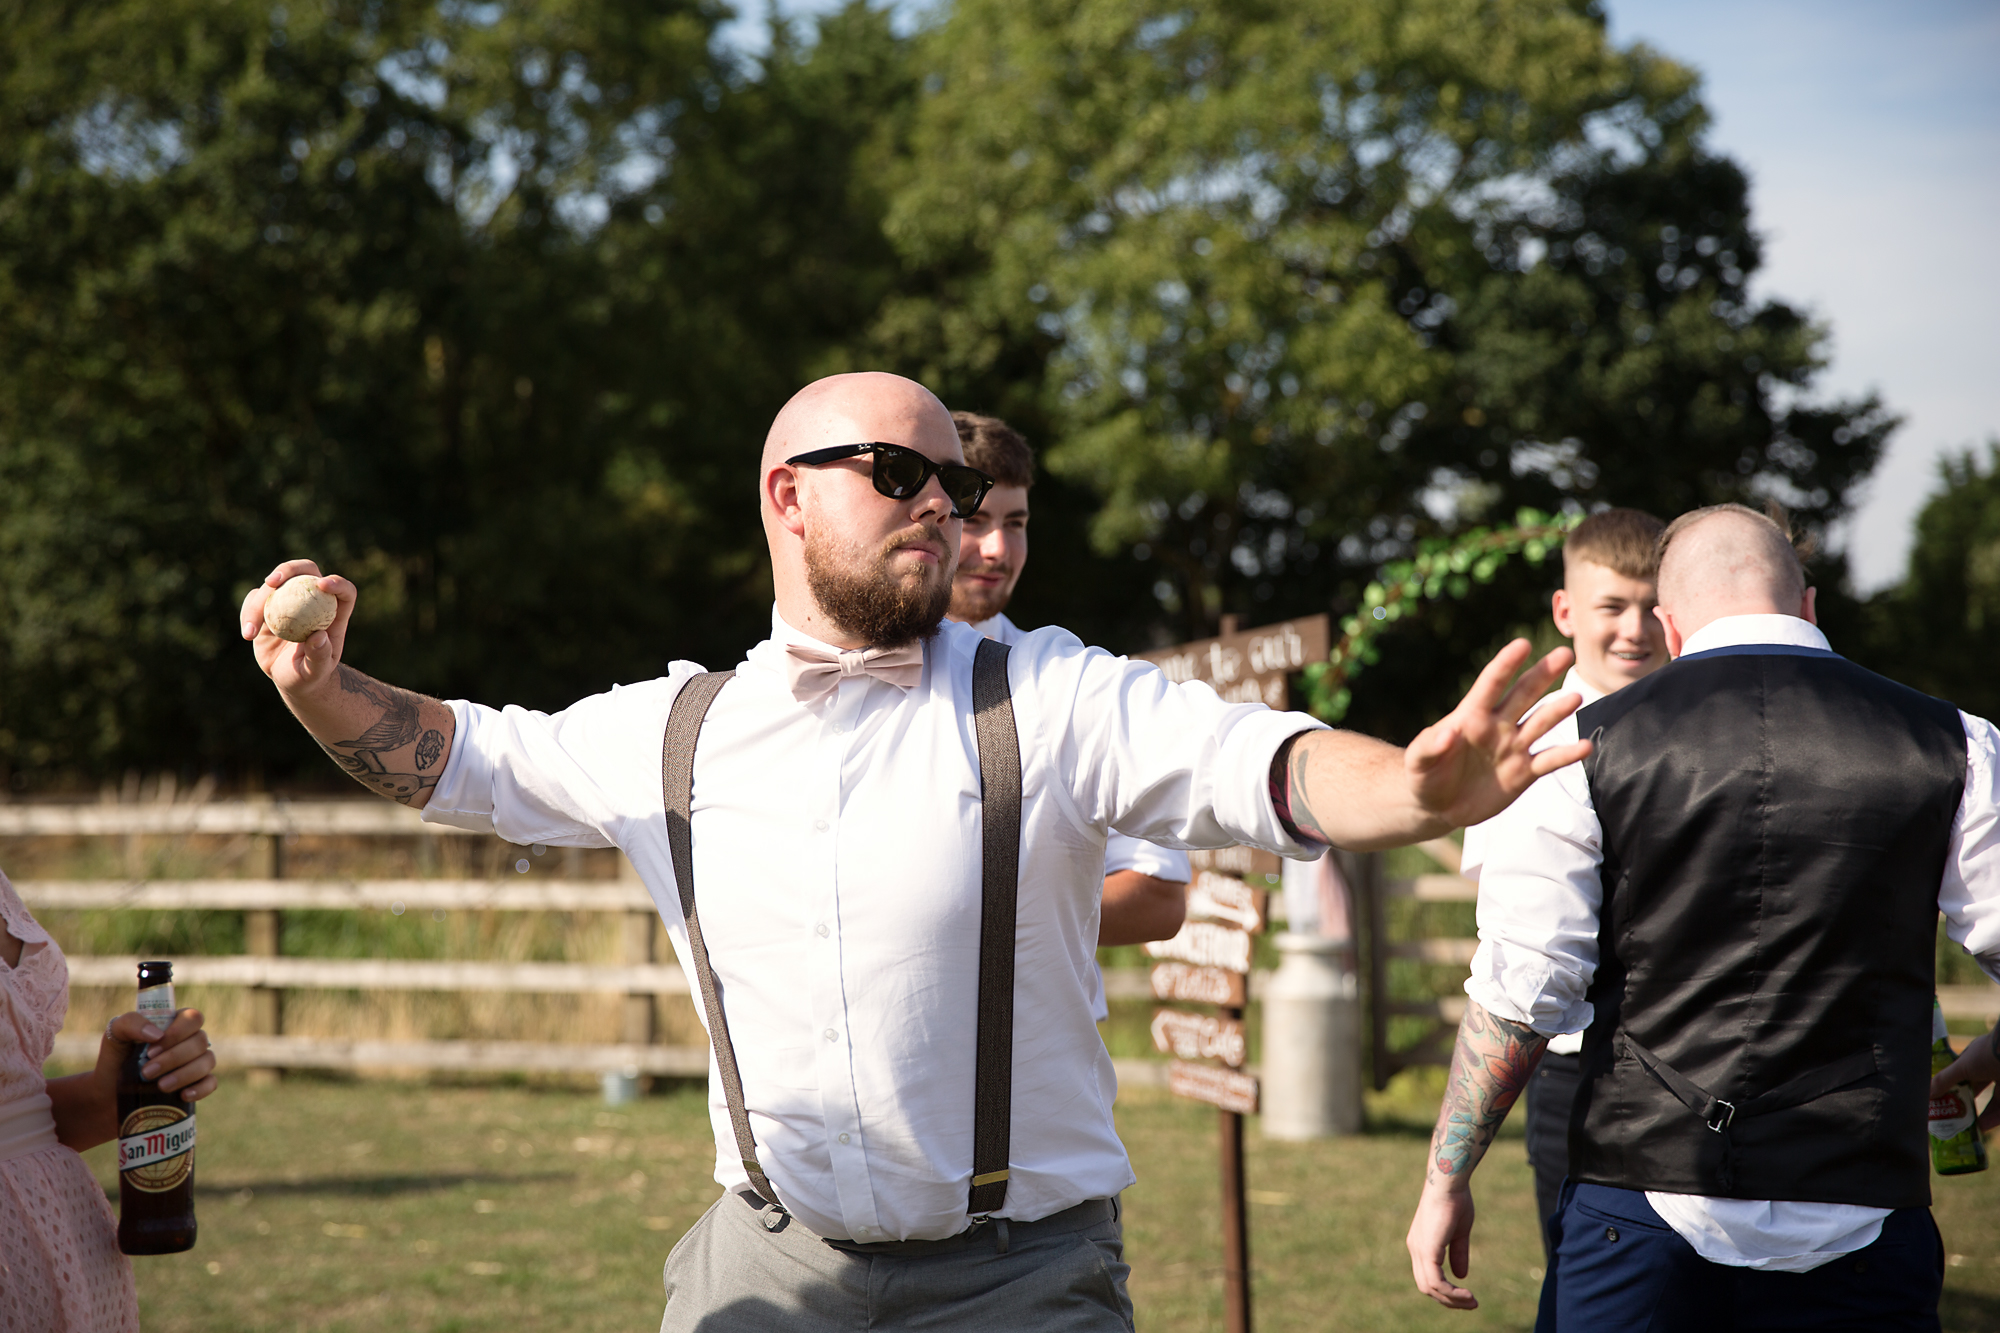 wedding games, photographer south wales